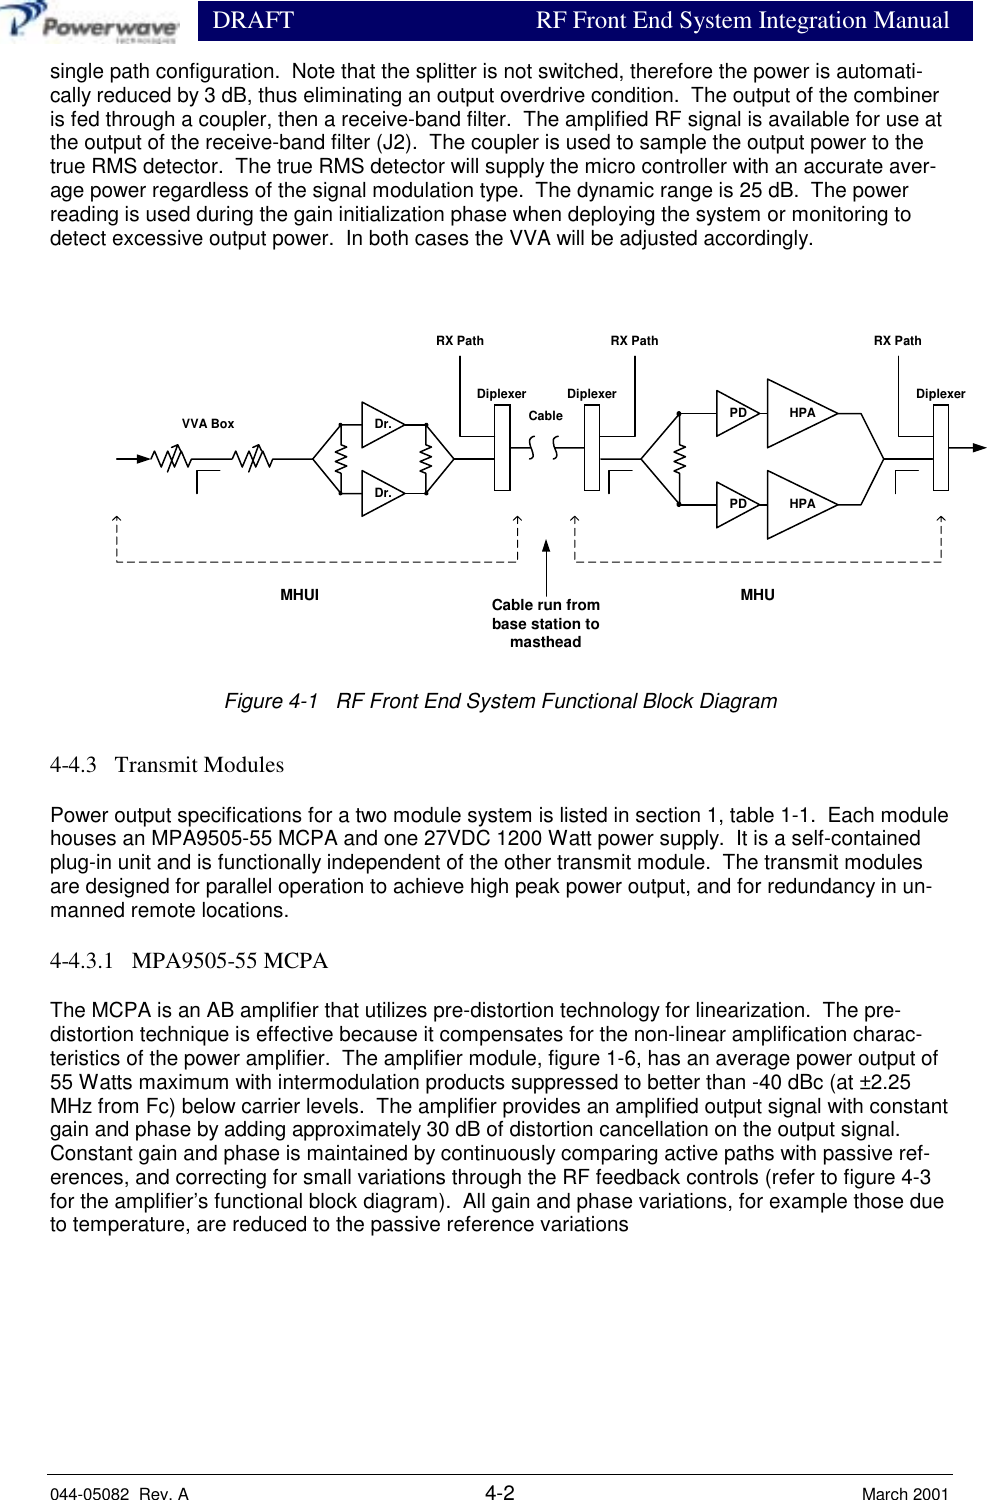                  DRAFT RF Front End System Integration Manual044-05082  Rev. A 4-2 March 2001single path configuration.  Note that the splitter is not switched, therefore the power is automati-cally reduced by 3 dB, thus eliminating an output overdrive condition.  The output of the combineris fed through a coupler, then a receive-band filter.  The amplified RF signal is available for use atthe output of the receive-band filter (J2).  The coupler is used to sample the output power to thetrue RMS detector.  The true RMS detector will supply the micro controller with an accurate aver-age power regardless of the signal modulation type.  The dynamic range is 25 dB.  The powerreading is used during the gain initialization phase when deploying the system or monitoring todetect excessive output power.  In both cases the VVA will be adjusted accordingly.Figure 4-1   RF Front End System Functional Block Diagram4-4.3   Transmit ModulesPower output specifications for a two module system is listed in section 1, table 1-1.  Each modulehouses an MPA9505-55 MCPA and one 27VDC 1200 Watt power supply.  It is a self-containedplug-in unit and is functionally independent of the other transmit module.  The transmit modulesare designed for parallel operation to achieve high peak power output, and for redundancy in un-manned remote locations.4-4.3.1   MPA9505-55 MCPAThe MCPA is an AB amplifier that utilizes pre-distortion technology for linearization.  The pre-distortion technique is effective because it compensates for the non-linear amplification charac-teristics of the power amplifier.  The amplifier module, figure 1-6, has an average power output of55 Watts maximum with intermodulation products suppressed to better than -40 dBc (at ±2.25MHz from Fc) below carrier levels.  The amplifier provides an amplified output signal with constantgain and phase by adding approximately 30 dB of distortion cancellation on the output signal.Constant gain and phase is maintained by continuously comparing active paths with passive ref-erences, and correcting for small variations through the RF feedback controls (refer to figure 4-3for the amplifier’s functional block diagram).  All gain and phase variations, for example those dueto temperature, are reduced to the passive reference variationsCableDiplexerDiplexerDr.Dr.PDPDHPAHPAVVA BoxMHUMHUIDiplexerCable run frombase station tomastheadRX Path RX Path RX Path